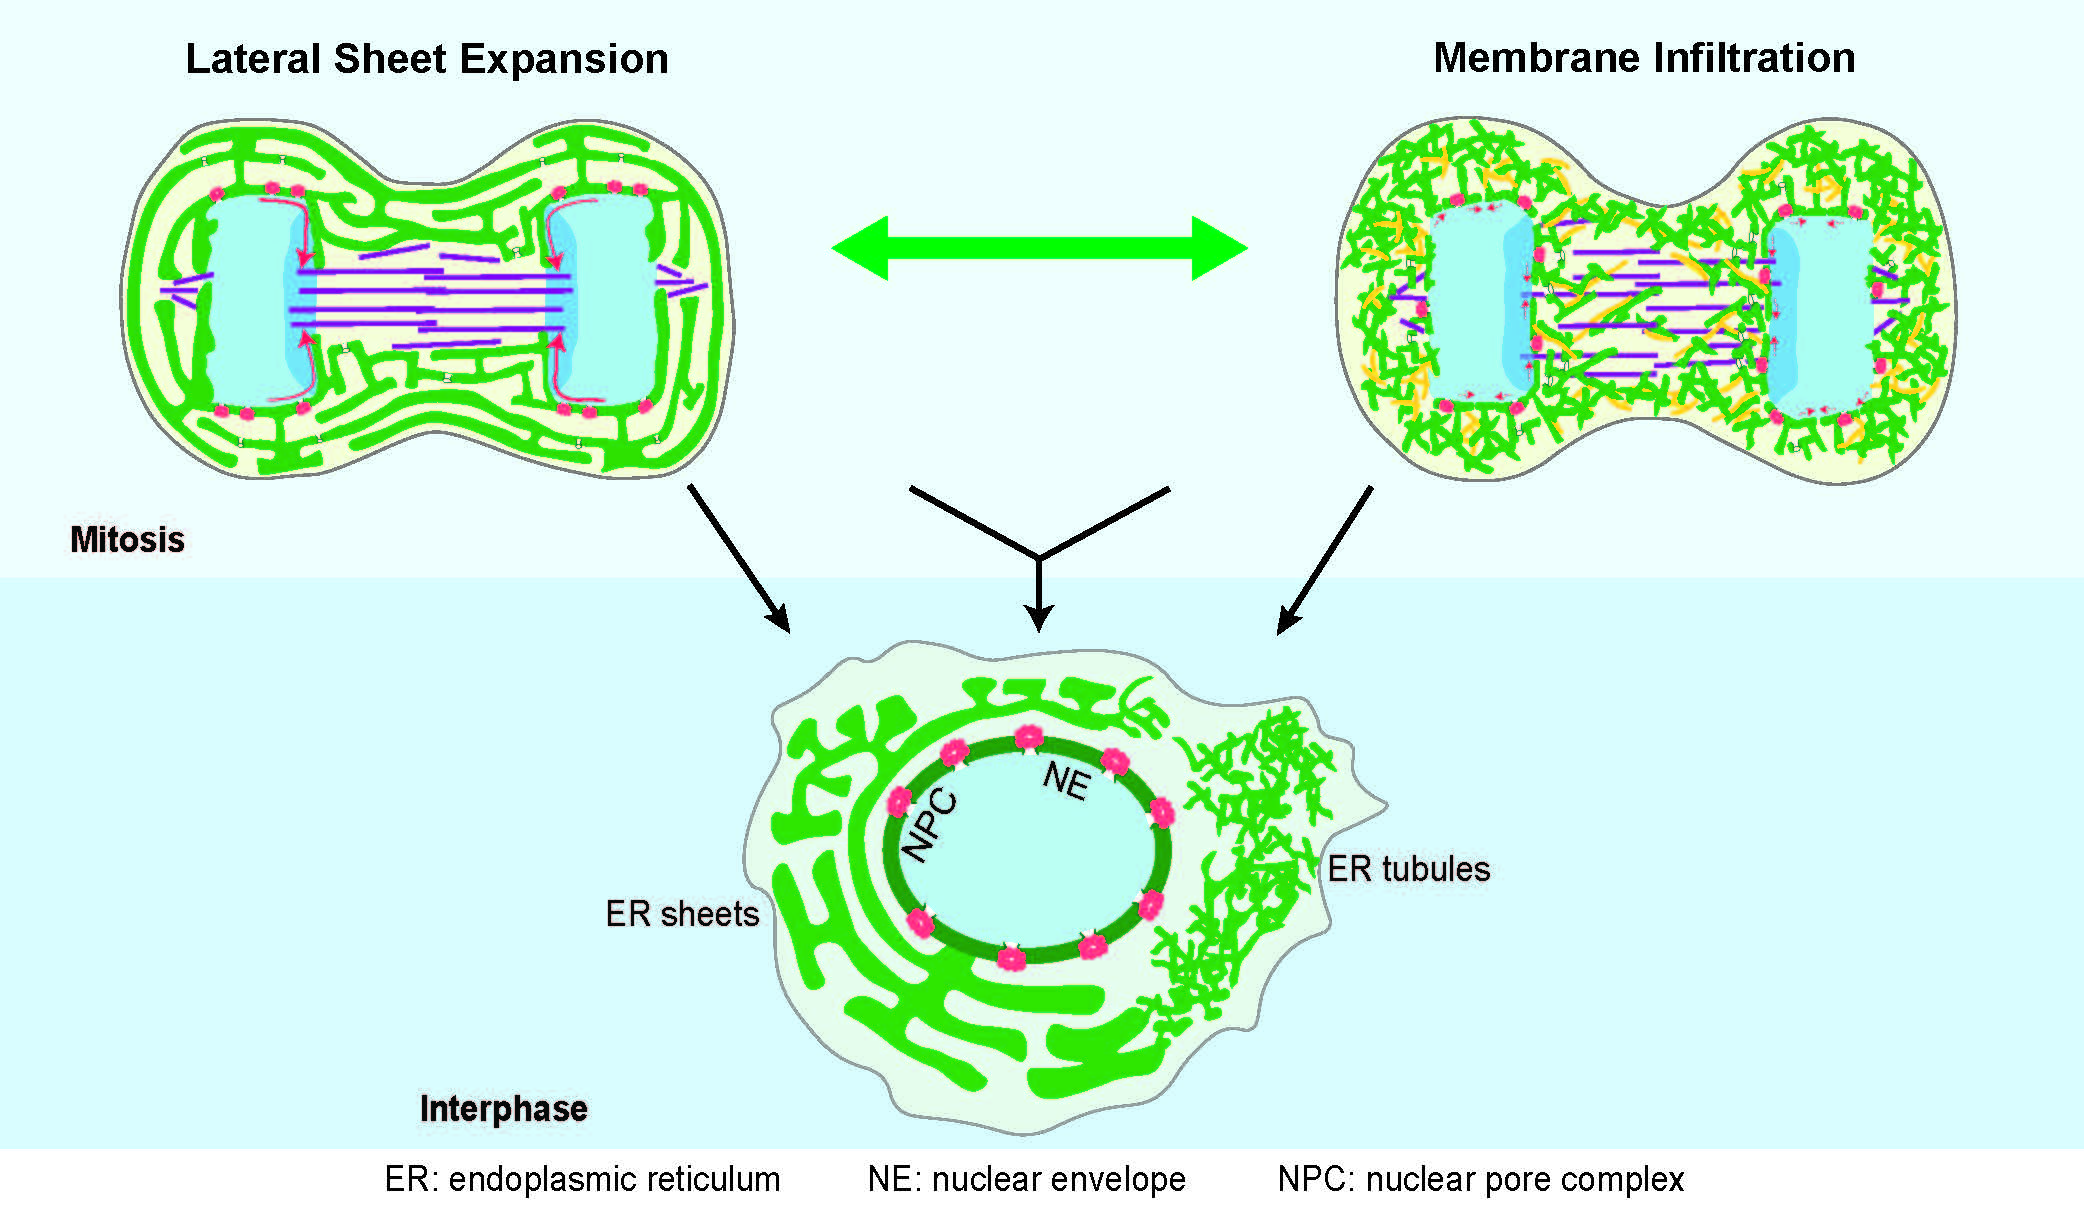 This image shows two distinct mechanisms for assembling the nuclear envelope (NE) during cell division in human cells – like having two different paths to the top of a mountain. 